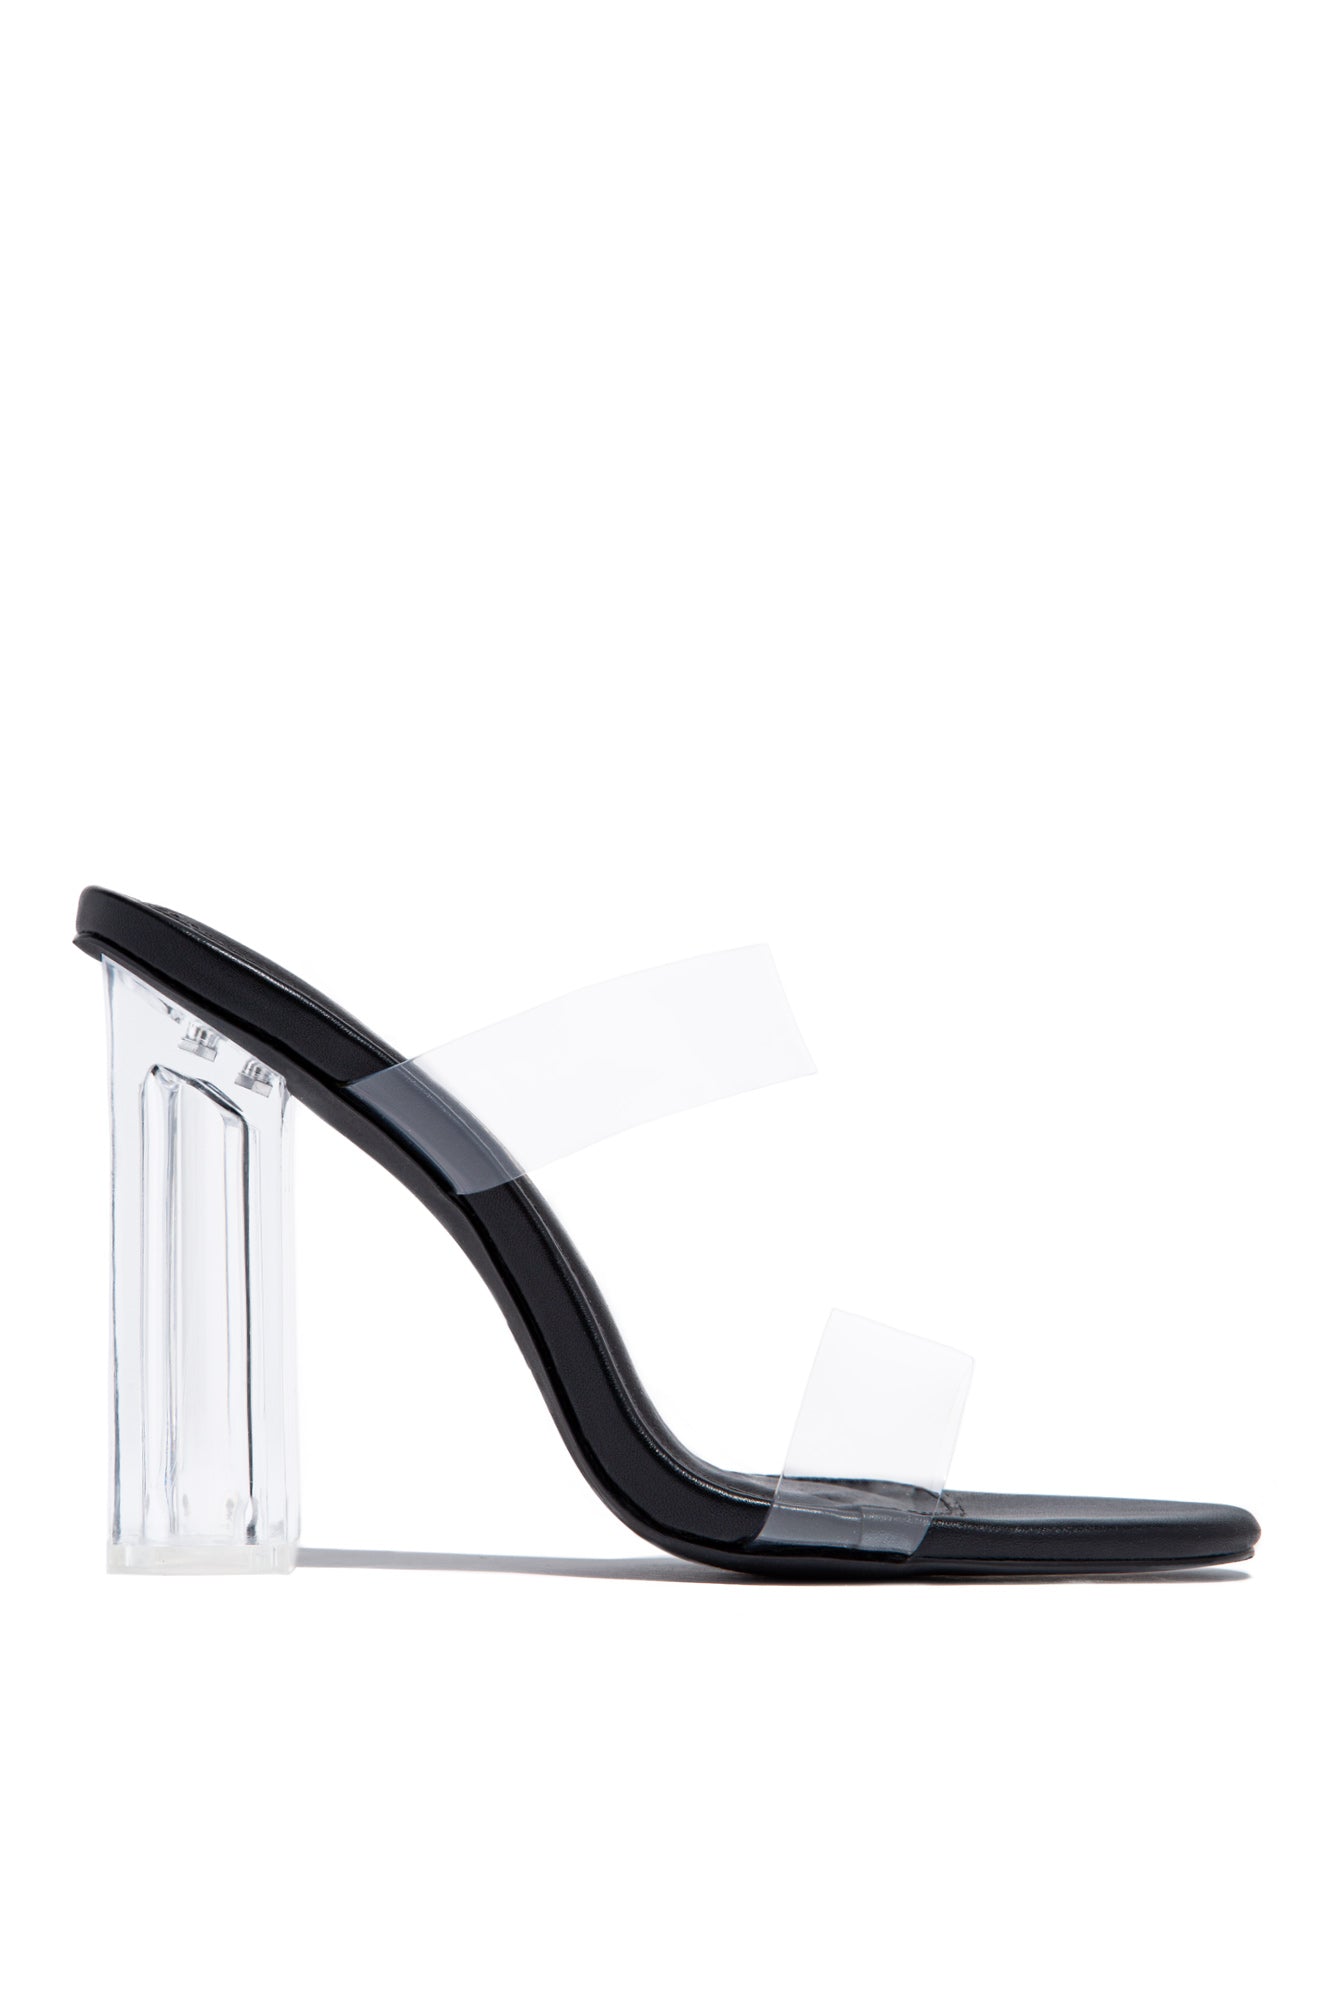 Clear Heels - Beauty Pageant Shoes